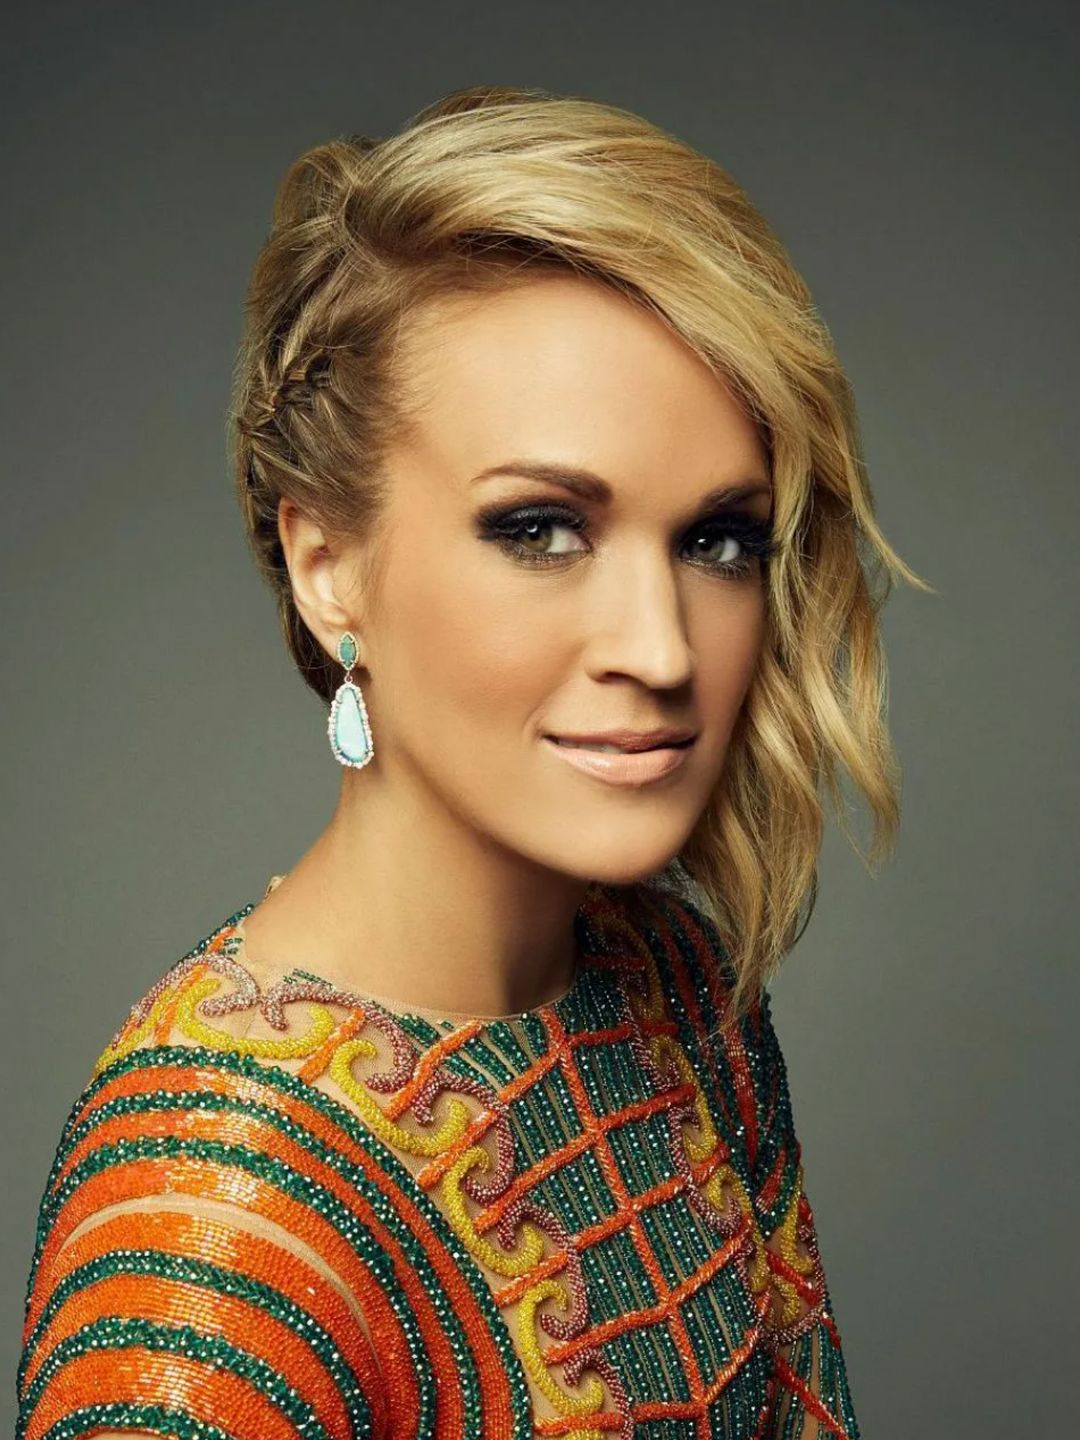 Carrie Underwood in real life